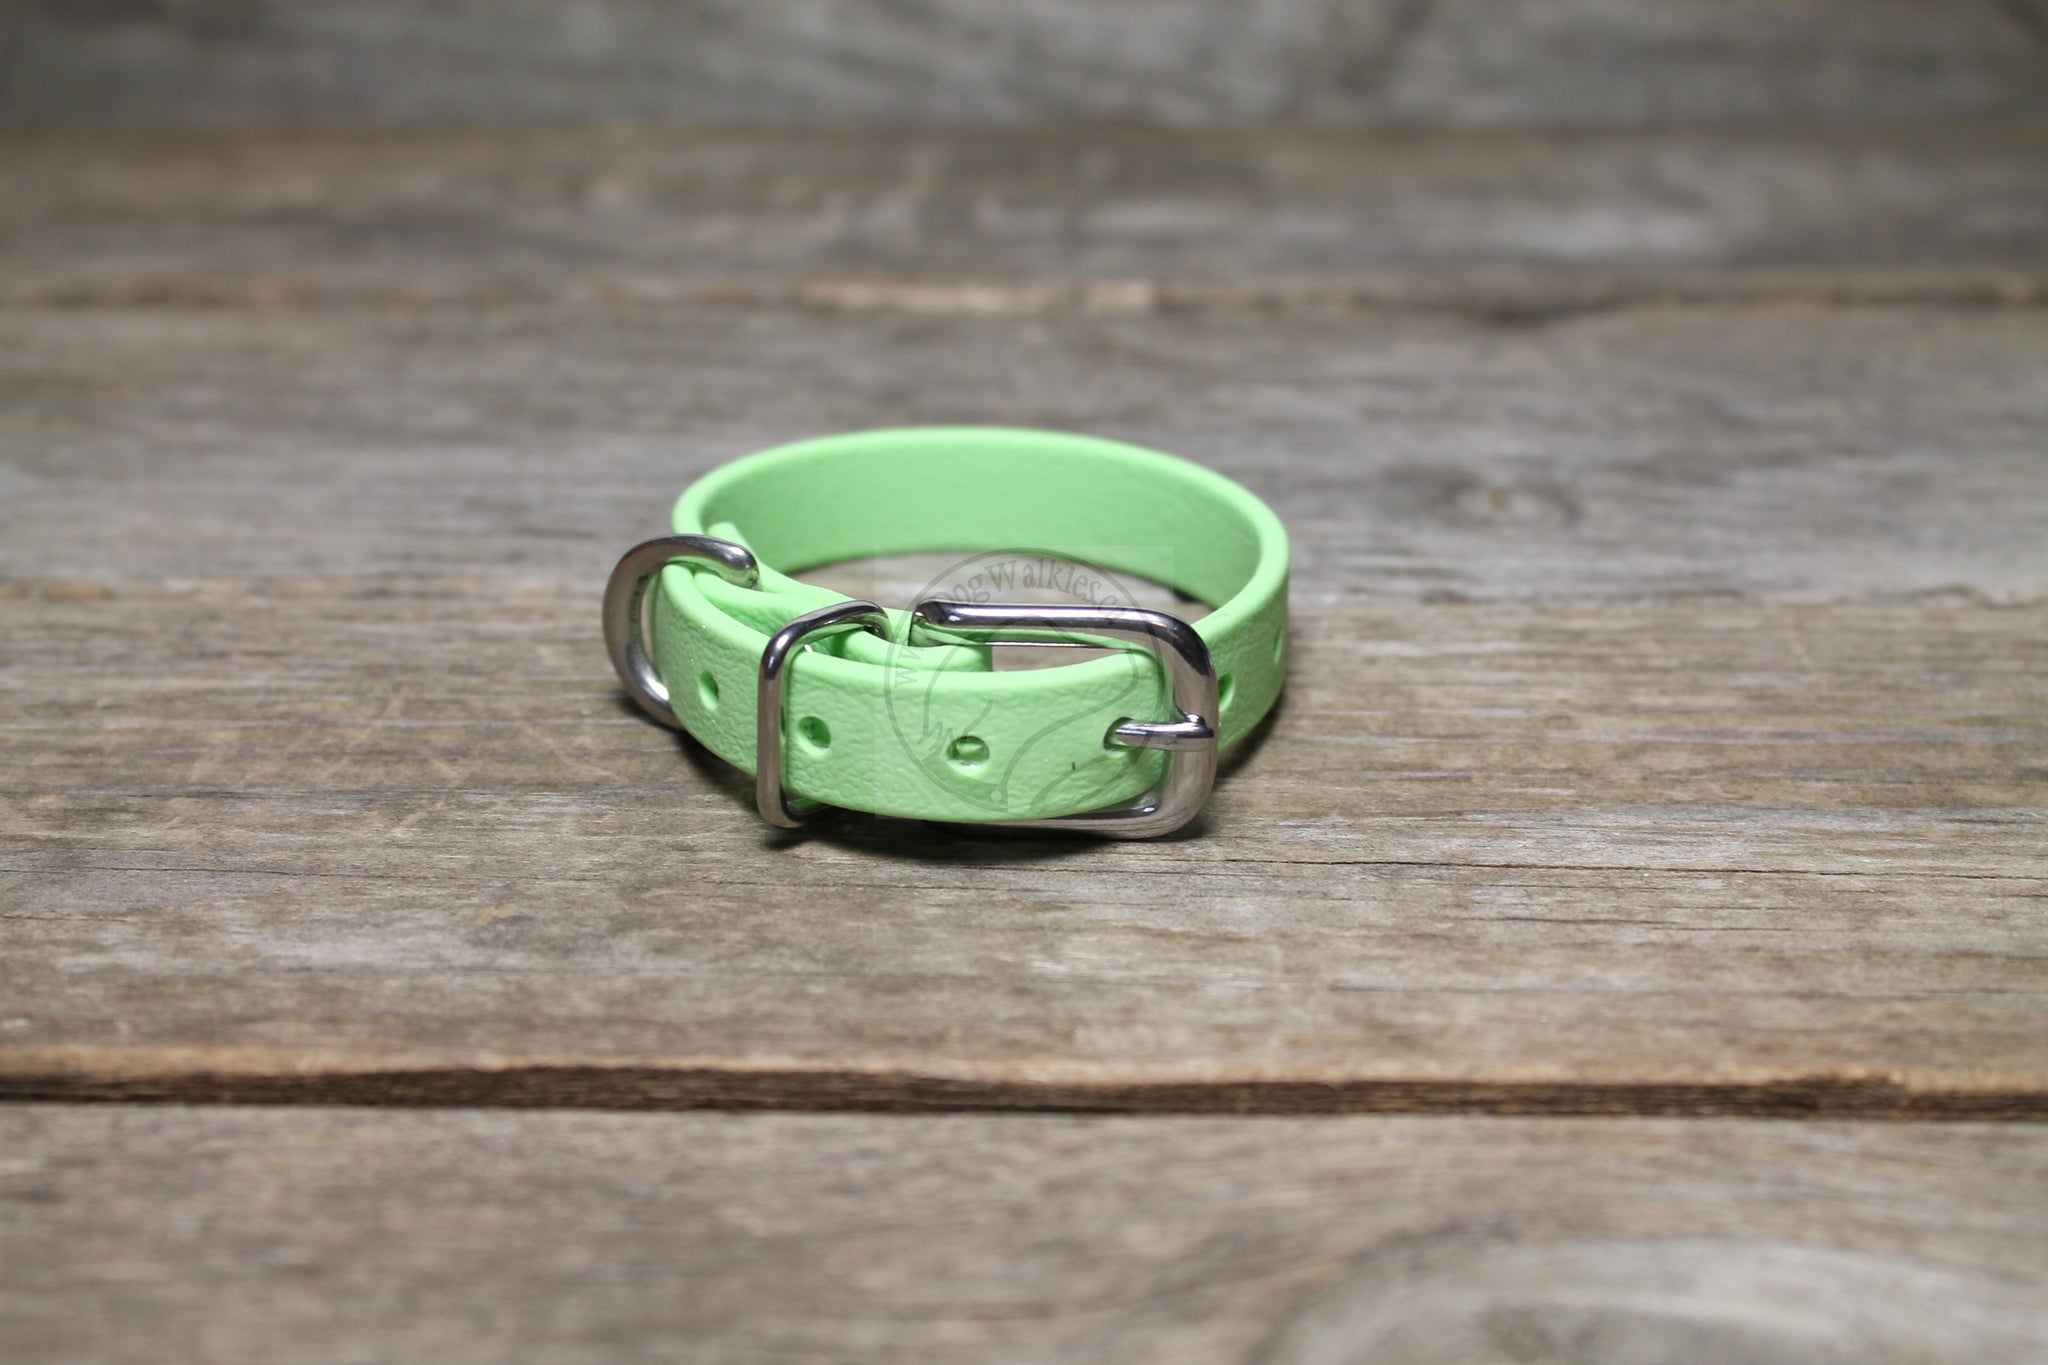 Discontinued- Limited Pastel Mint Green Biothane Small Dog Collar - 1/2" (12mm) wide